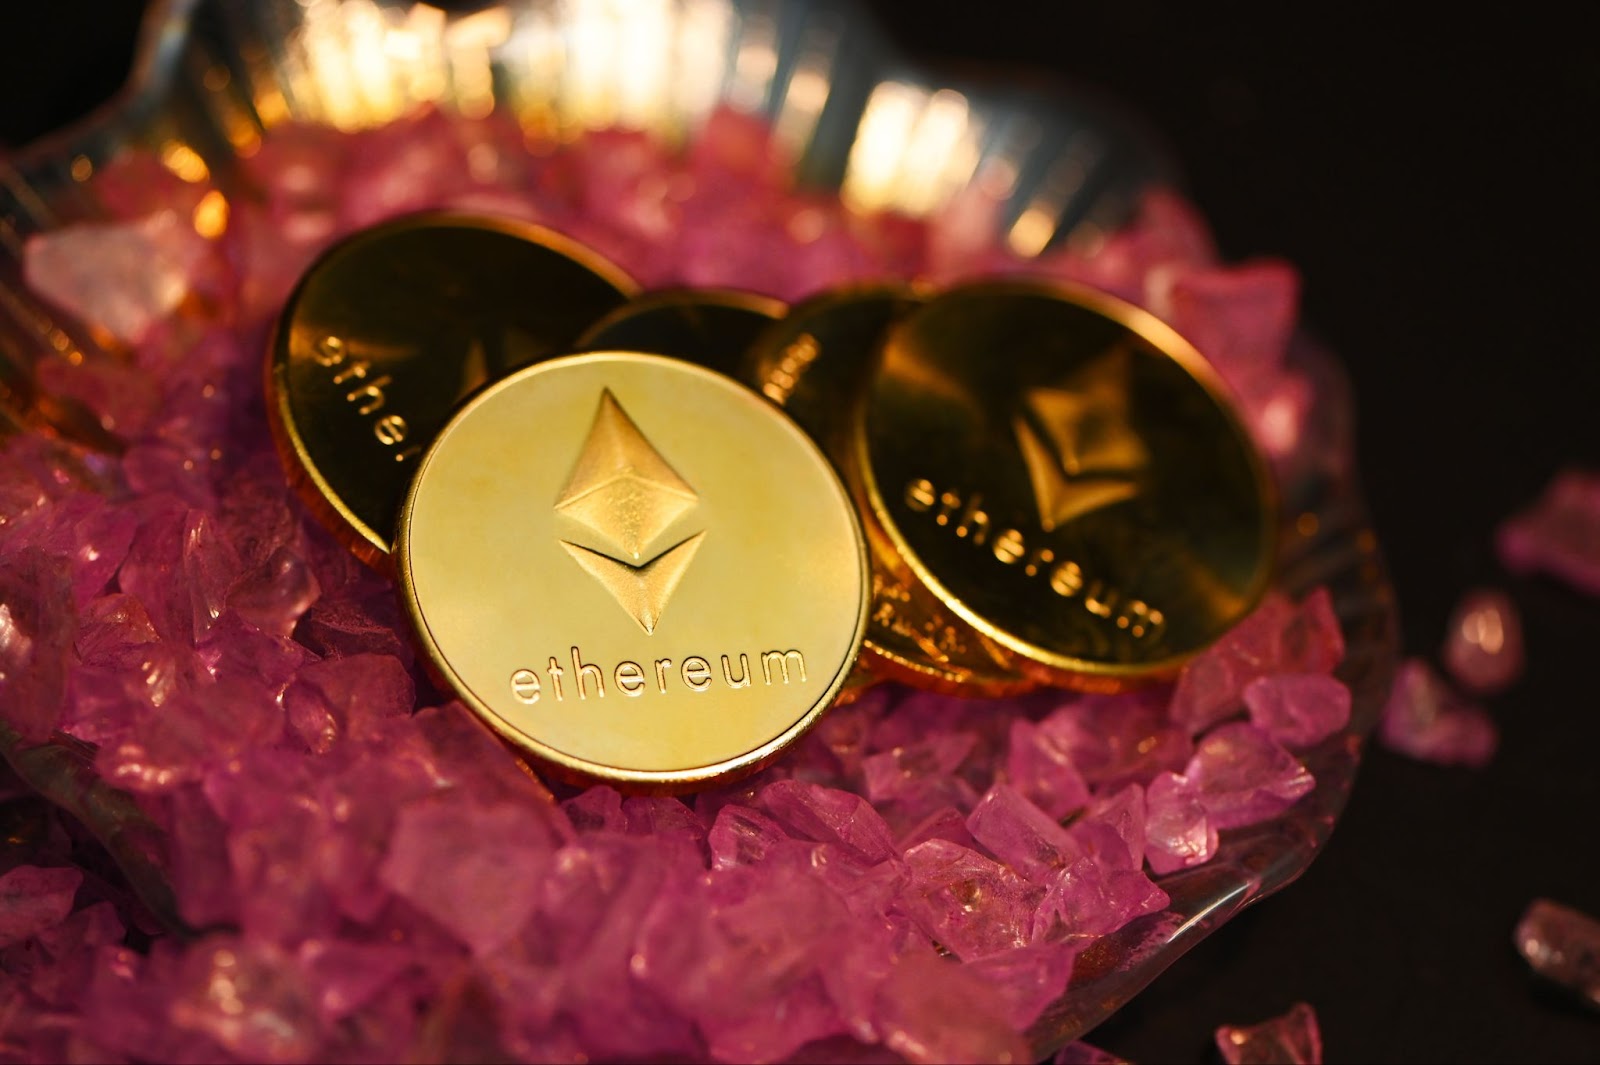 Ethereum coins in a tray with pink gemstones